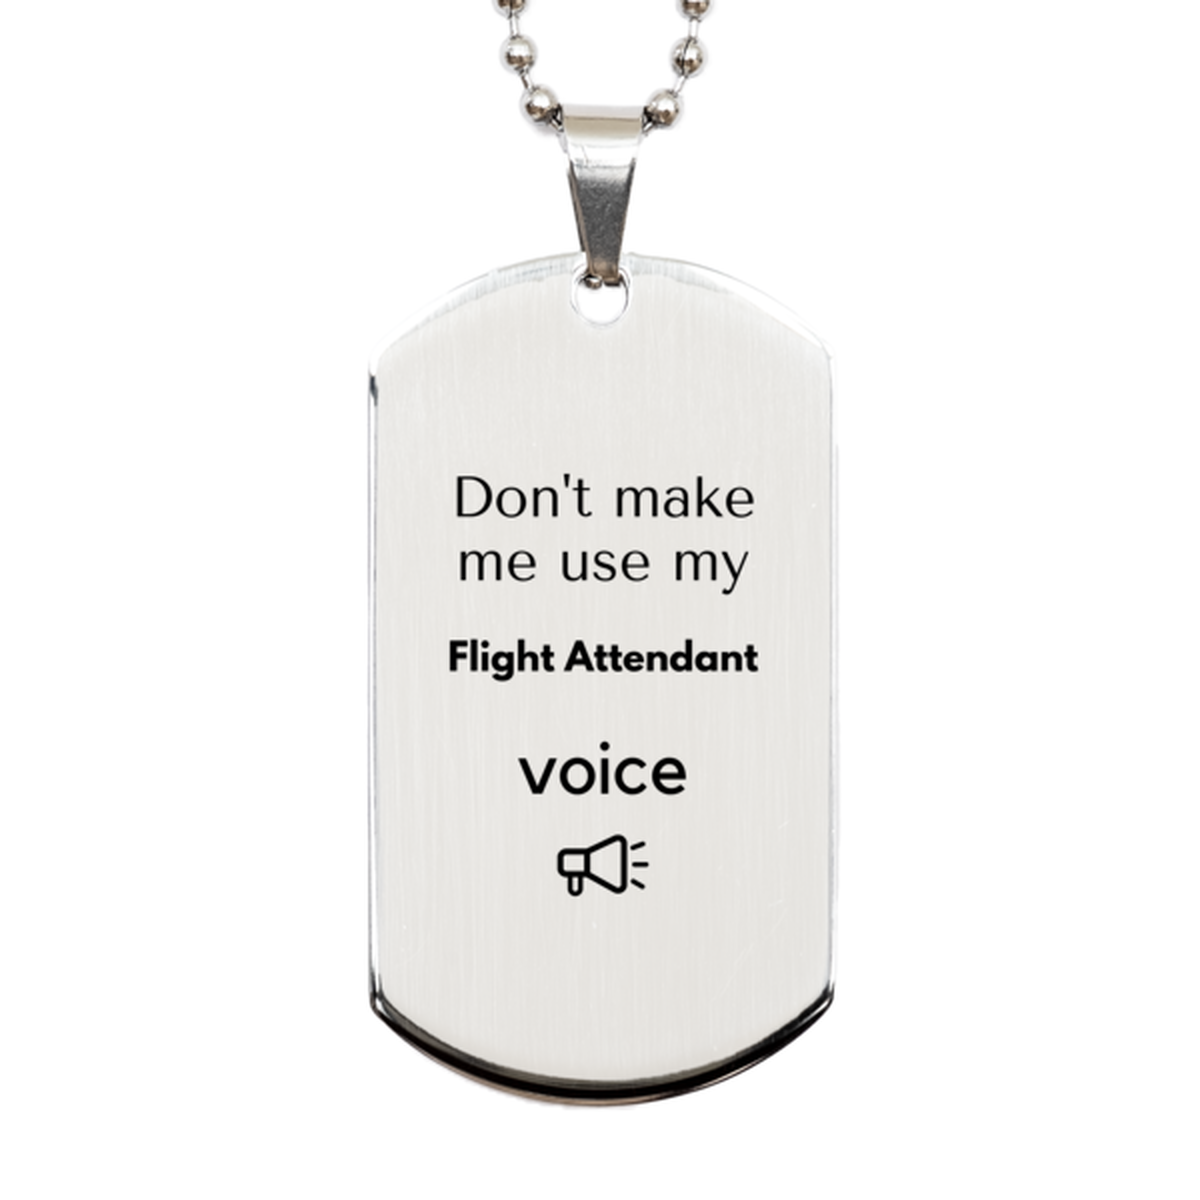 Don't make me use my Flight Attendant voice, Sarcasm Flight Attendant Gifts, Christmas Flight Attendant Silver Dog Tag Birthday Unique Gifts For Flight Attendant Coworkers, Men, Women, Colleague, Friends